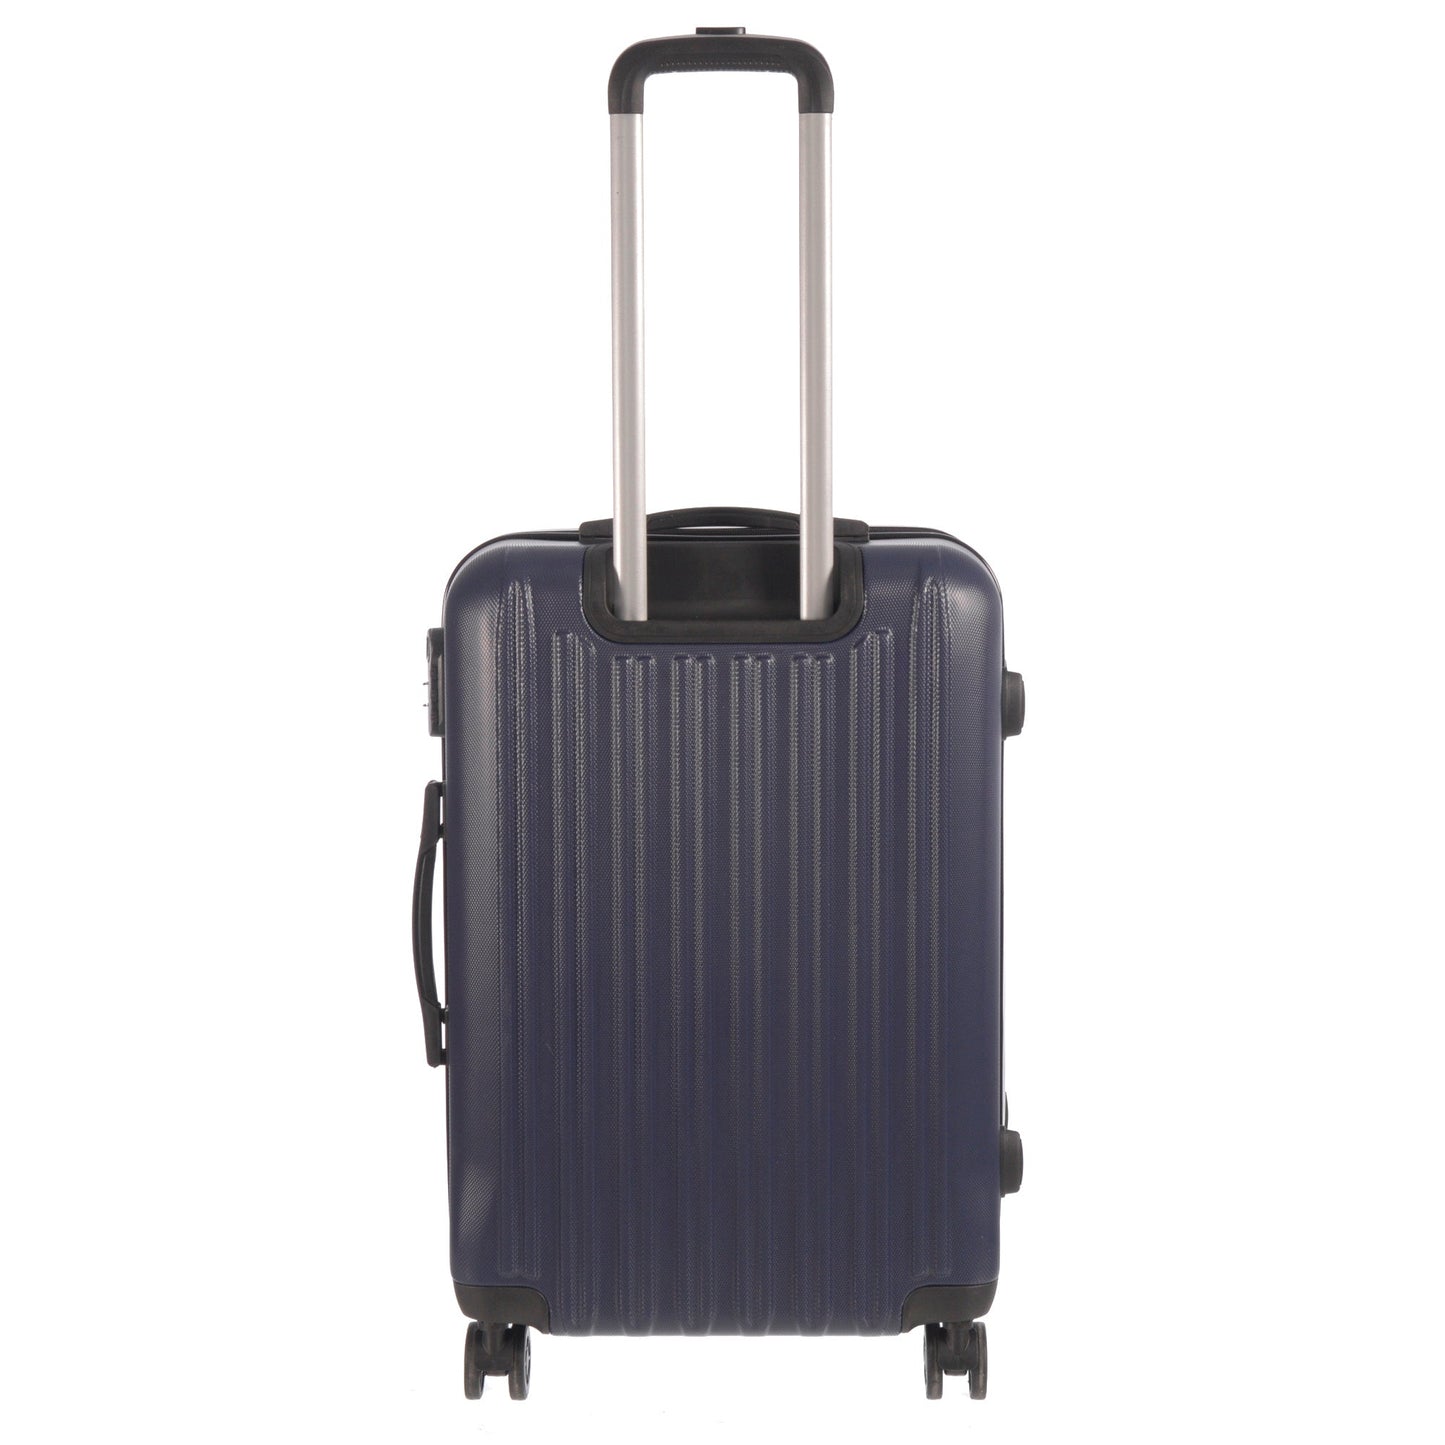 24" Medium Size Luggage Grove Collection